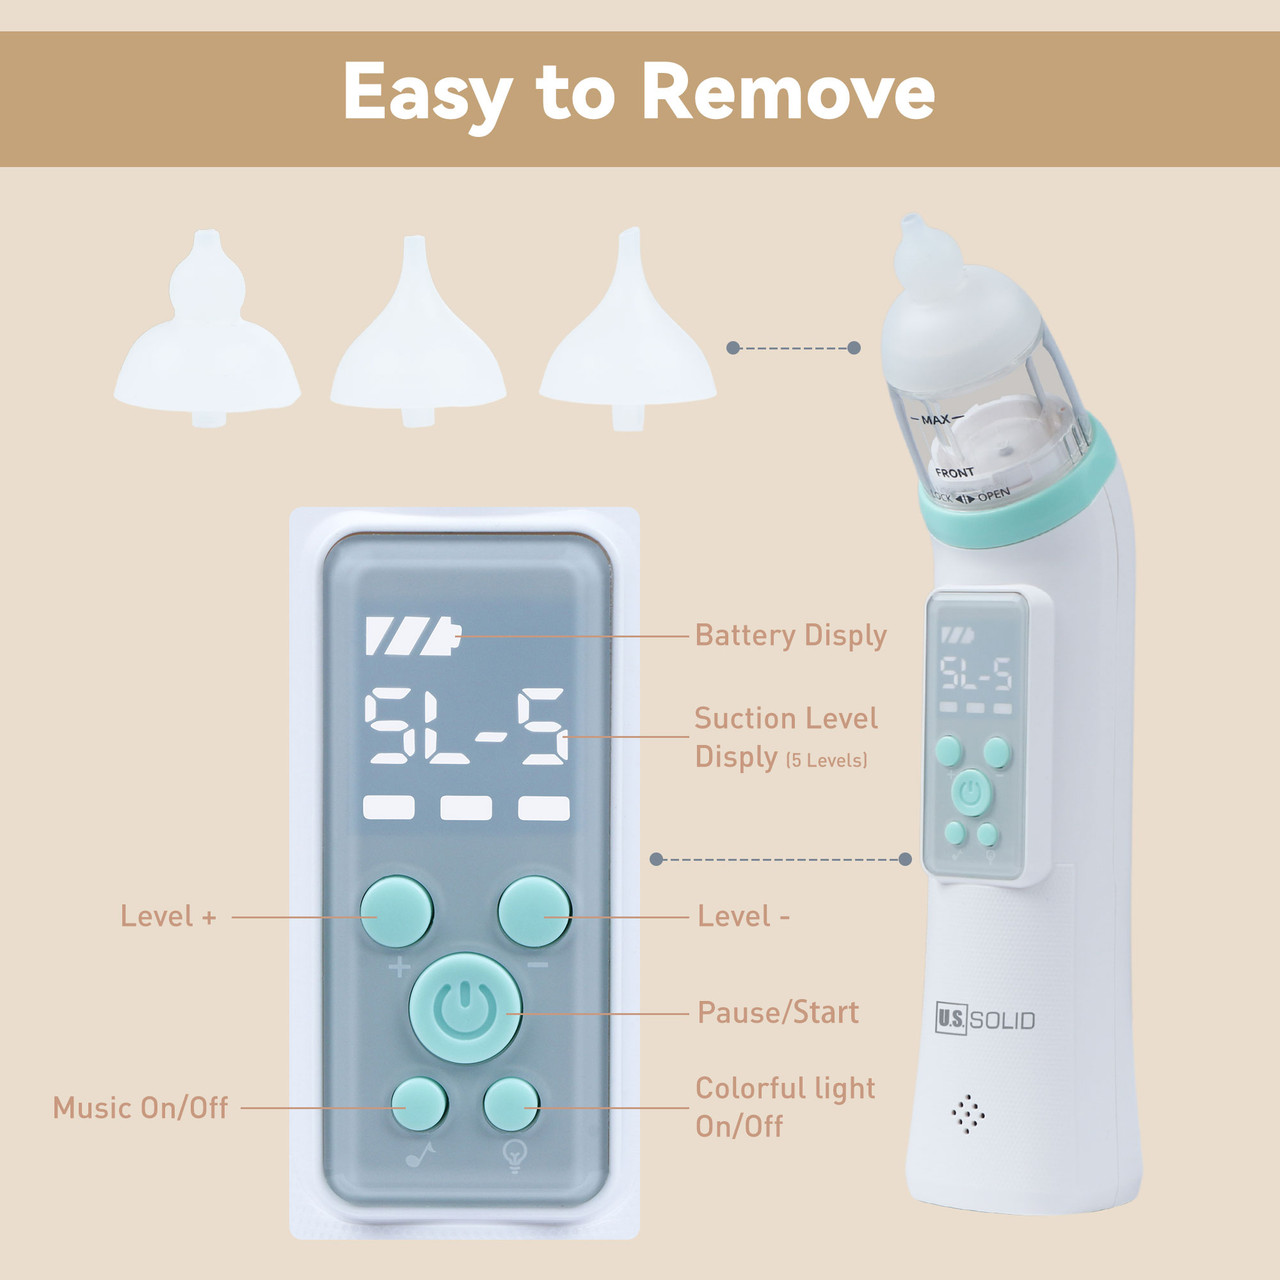 Nasal Aspirator for Baby Electric Baby Nose Sucker with Adjustable